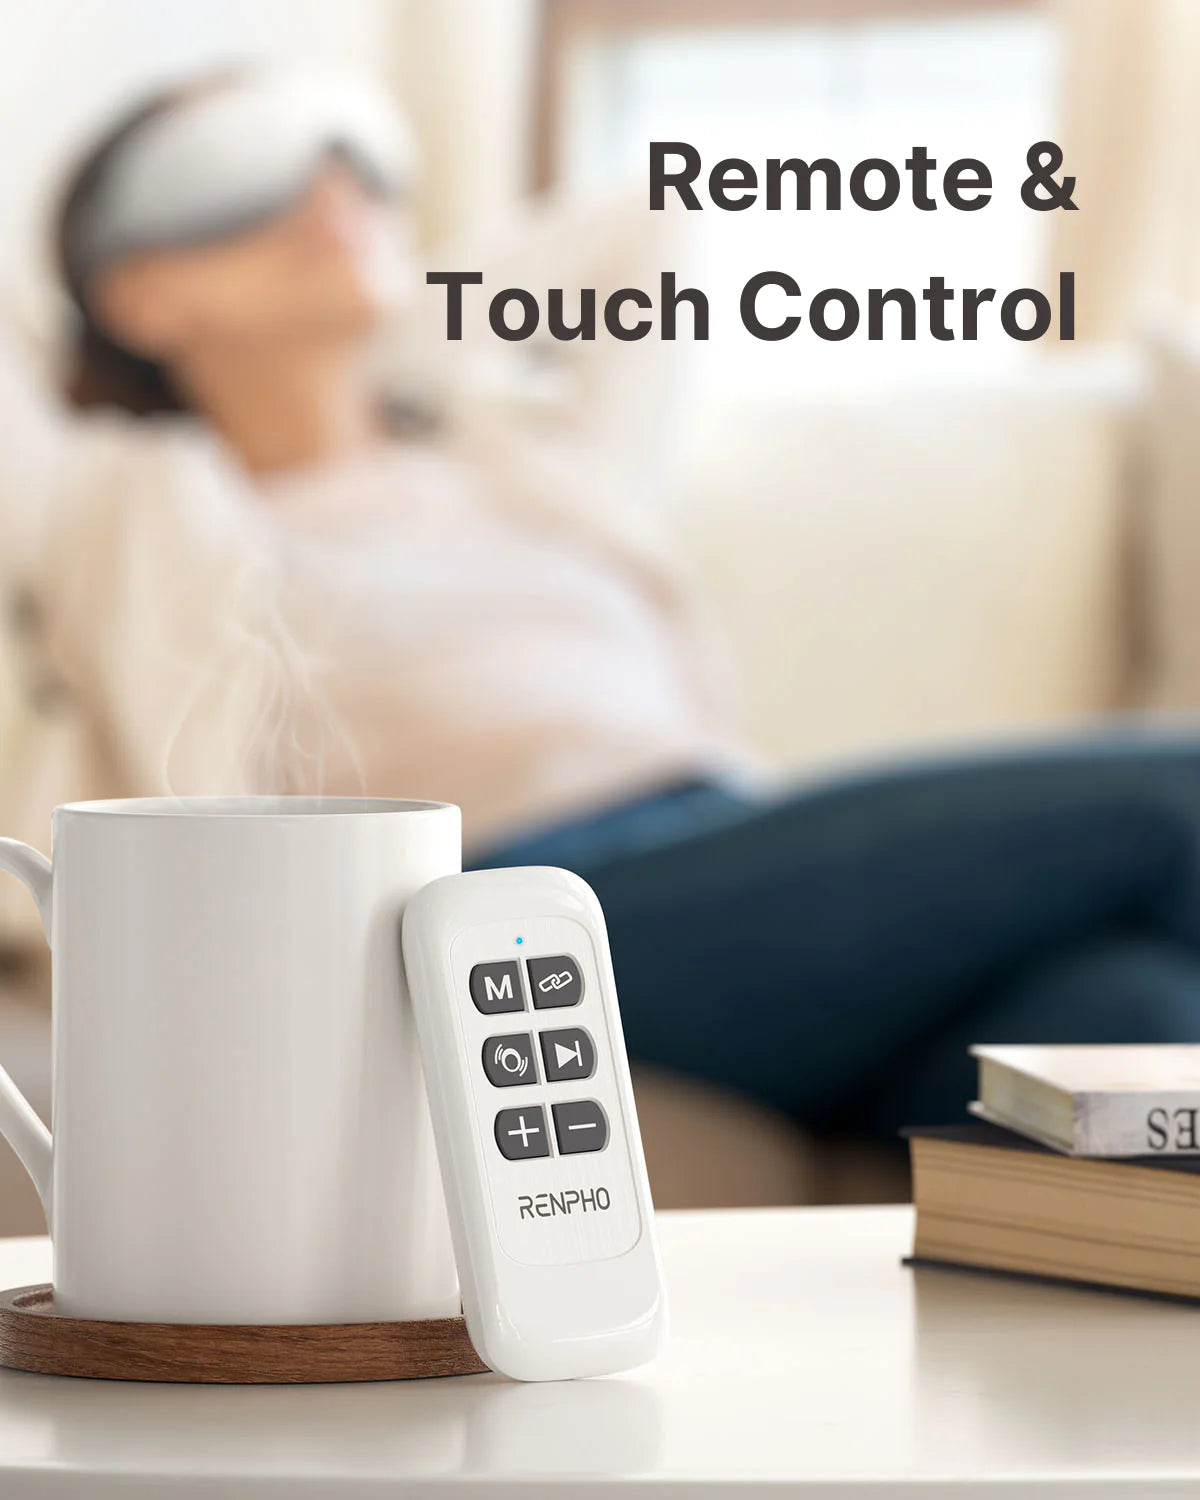 A relaxed person using an Eyeris 1 Eye Massager to relieve eye strain reclines on a couch in the background. In the foreground, a white remote control labeled "Renpho EU" rests next to a steaming white mug on a coaster. Books are stacked nearby. The text "Remote & Touch Control" is displayed near the top.